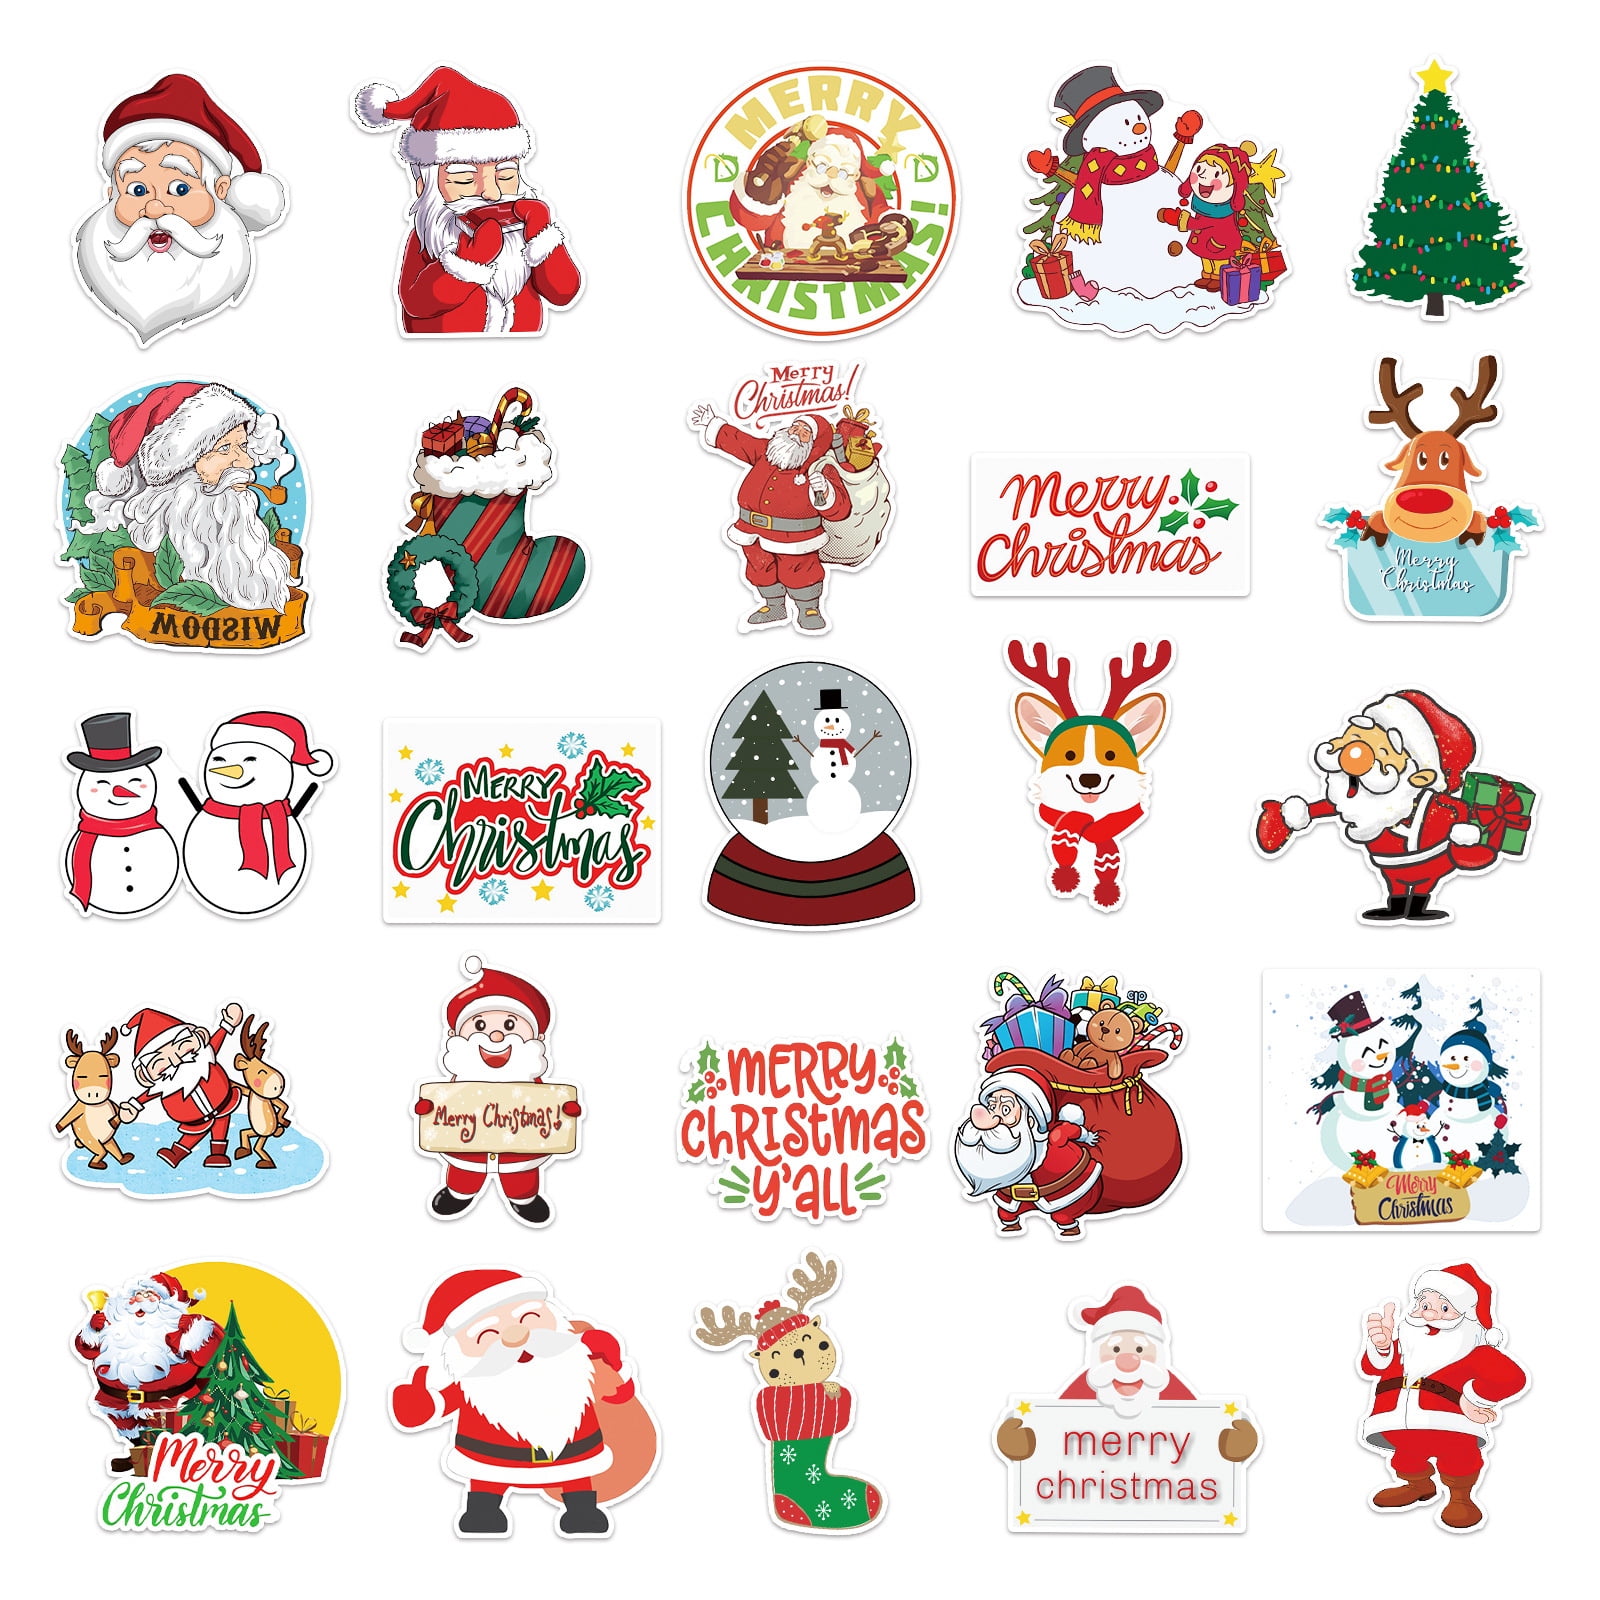 500Pieces Christmas Stickers Roll Round Snowflake Christmas Tree Stickers for Kids Tiny Xmas Winter Holiday Stickers for Card Craft Envelope Seal